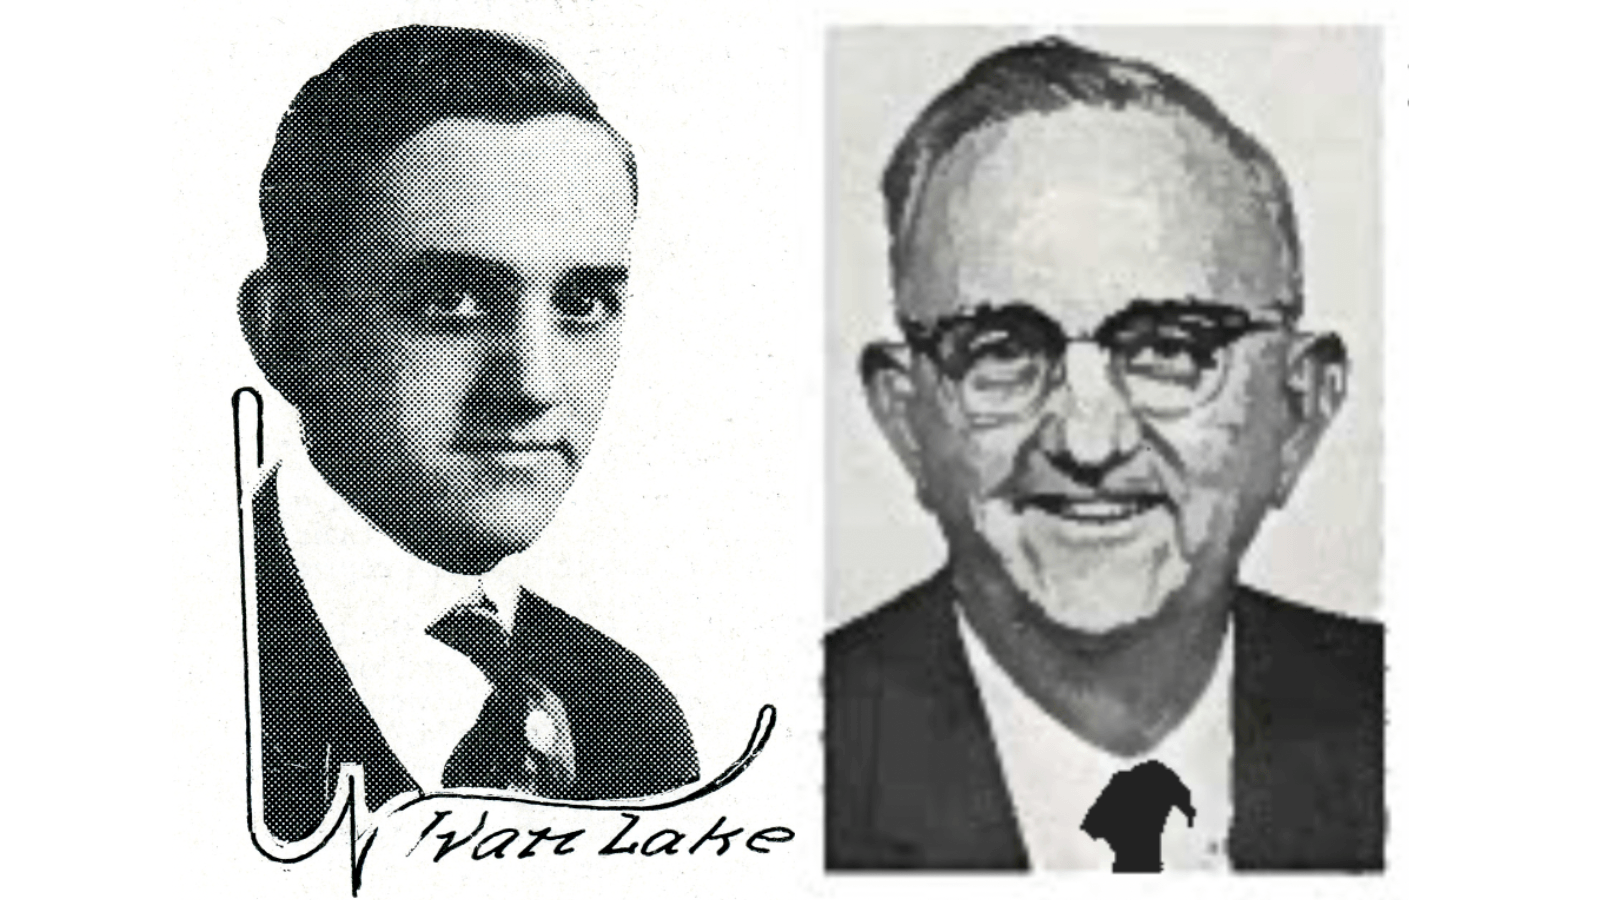 After graduation, Ivan Lake became telegraph editor, sports editor and managing editor for the Bowling Green Sentinel-Tribune. Lake then worked as a reporter for the San Diego Union in California and eventually became the public information officer for the San Diego County civil defense department.